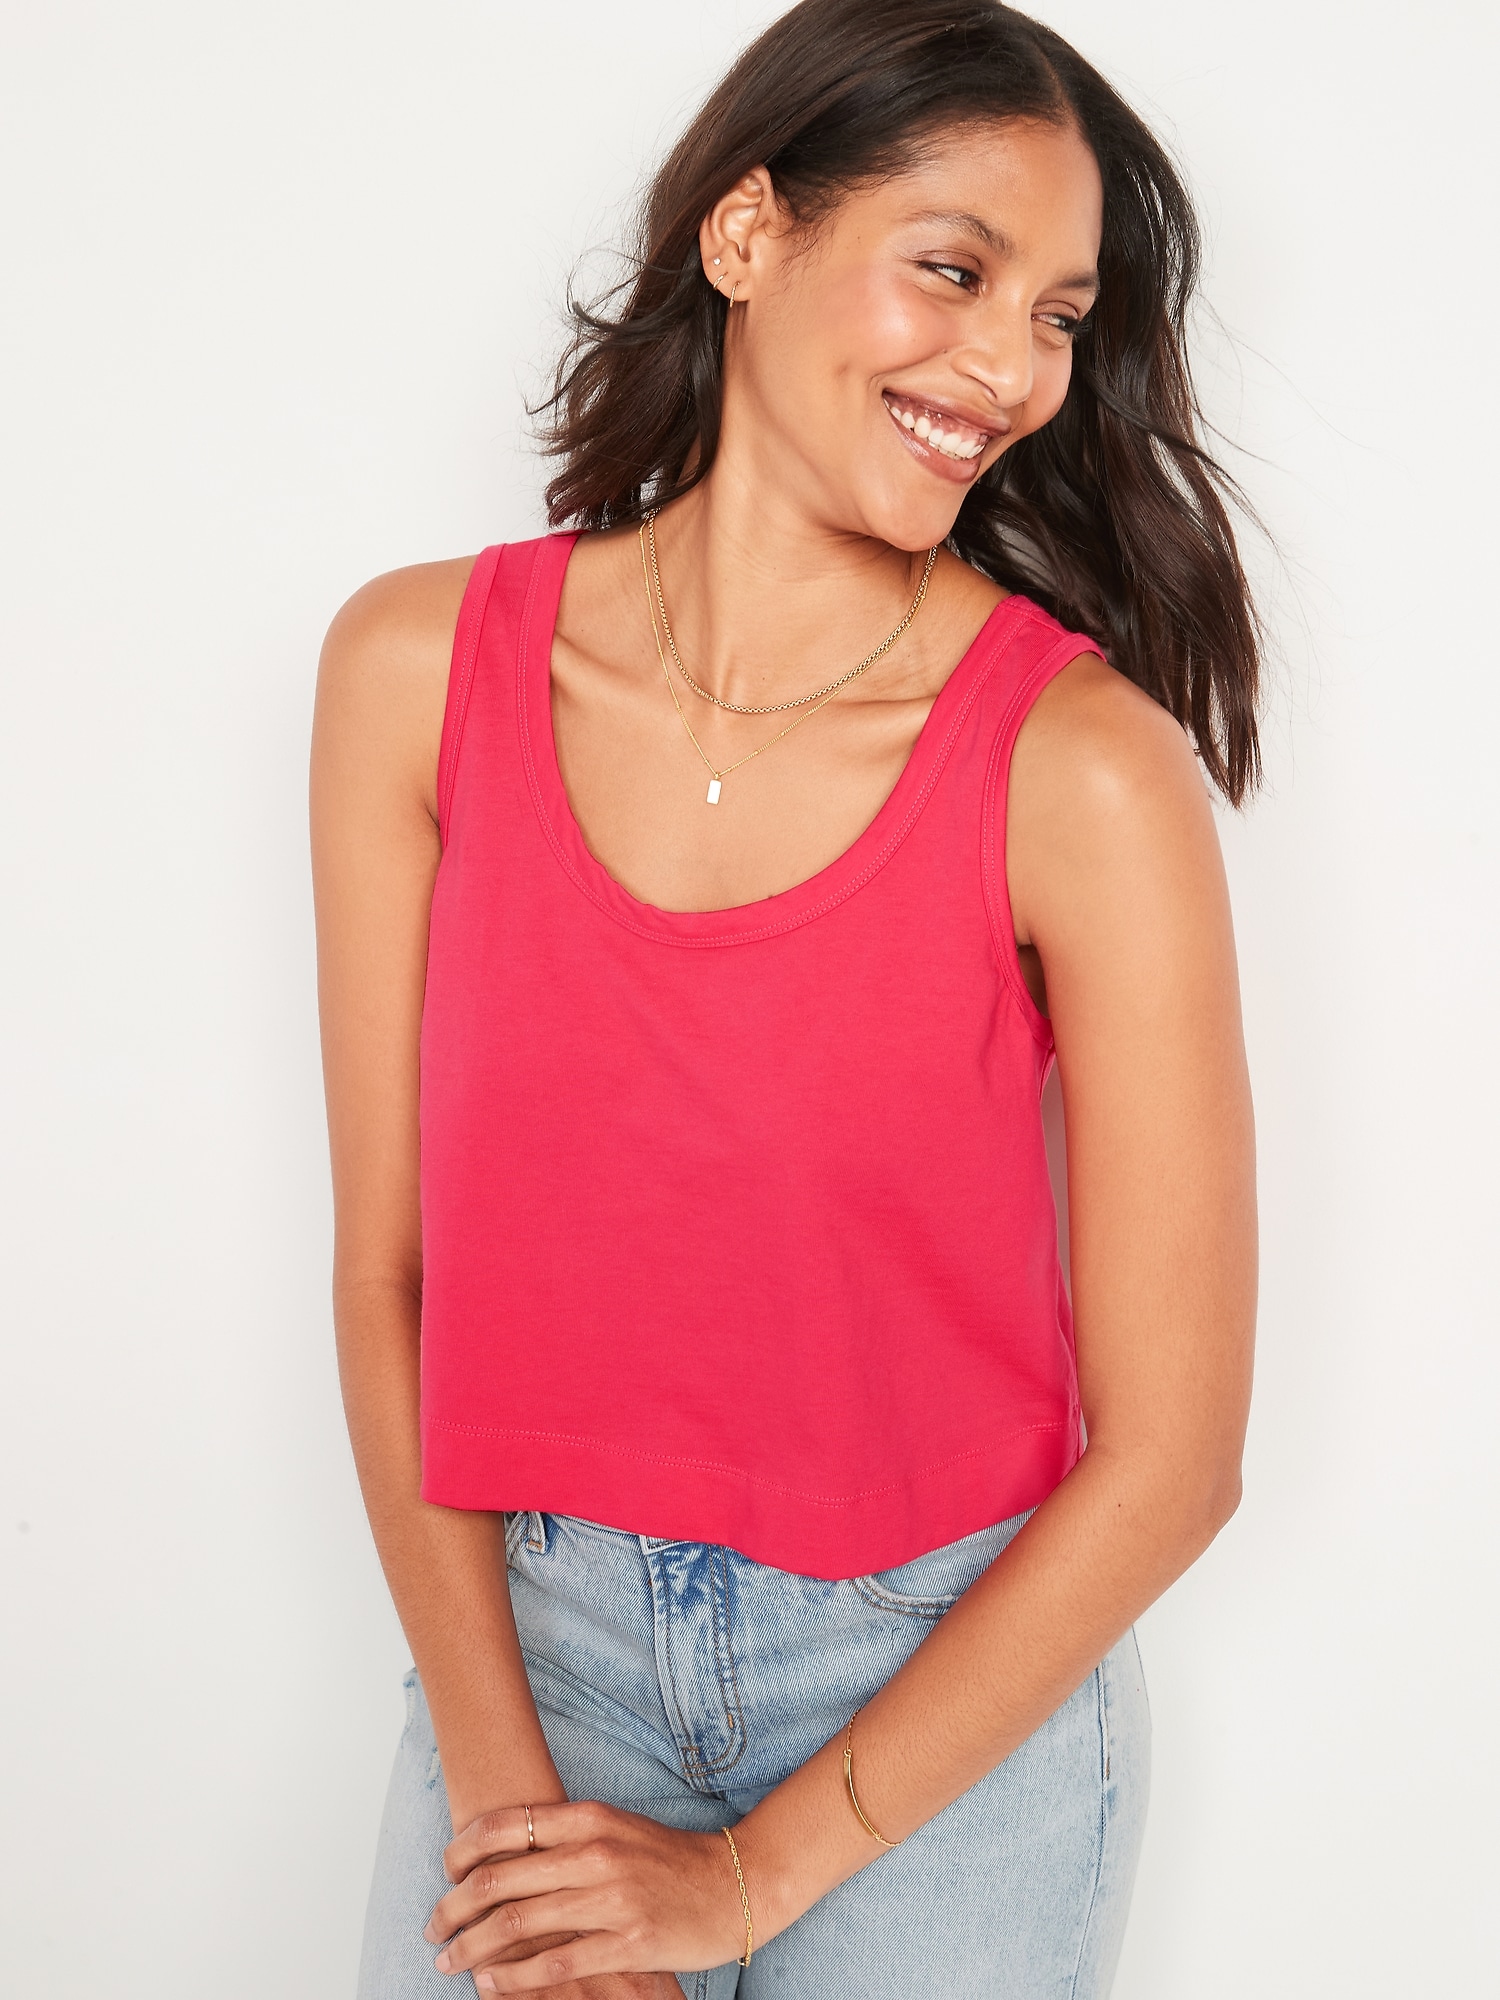 Old Navy Vintage Cropped Tank Top for Women pink. 1